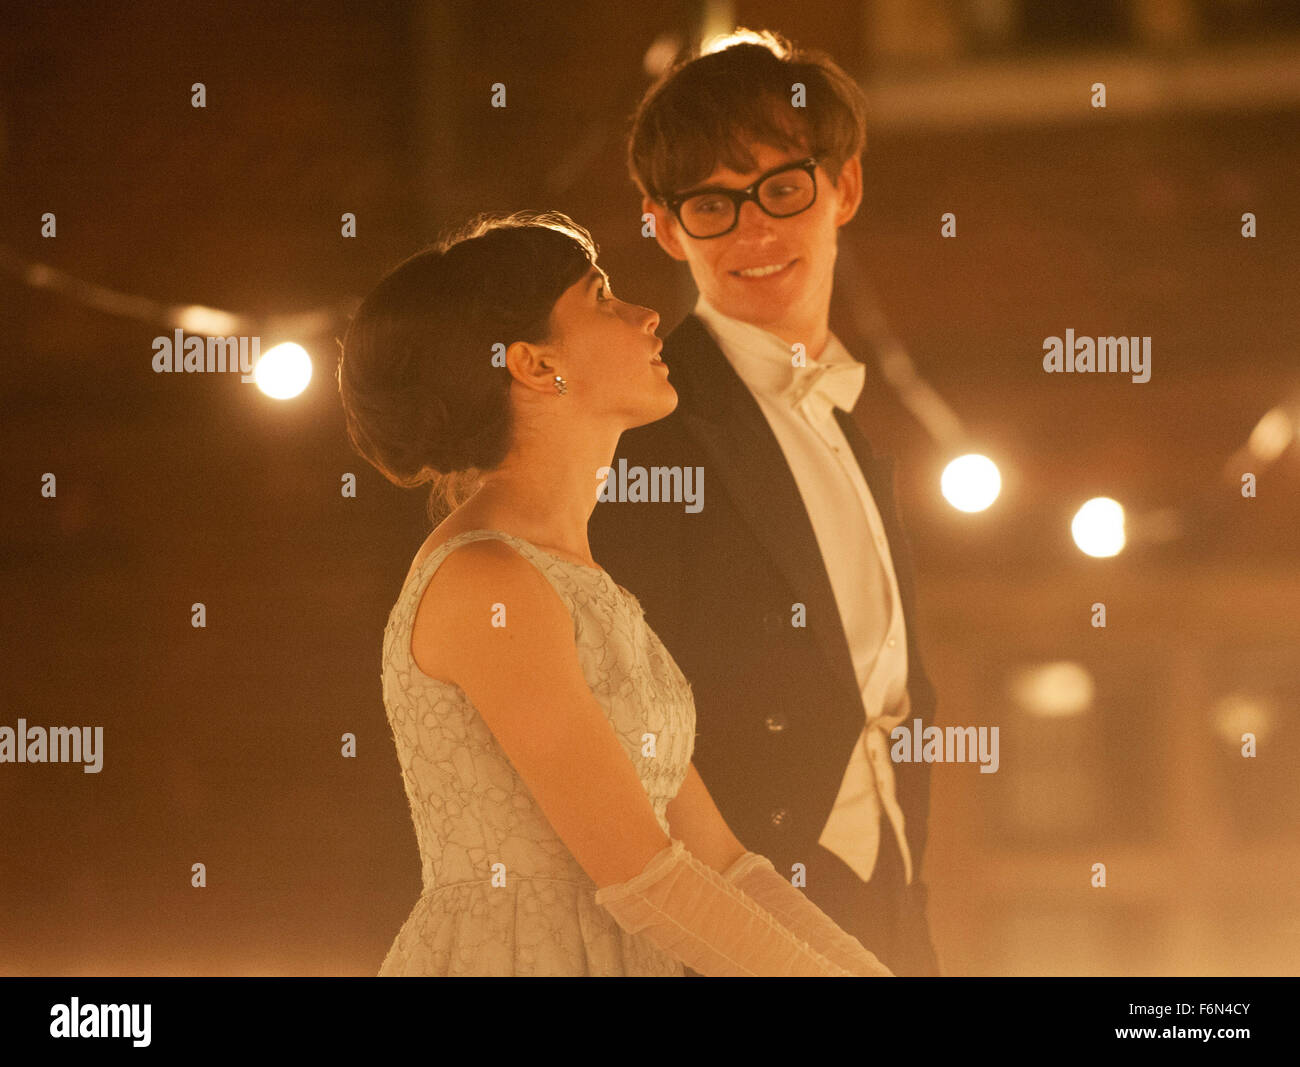 RELEASE DATE: November 7, 2014.TITLE: The Theory Of Everything.STUDIO: Focus Features.DIRECTOR: James Marsh.PLOT: A look at the relationship between the famous physicist Stephen Hawking and his wife.PICTURED: FELICITY JONES as Jane Wilde and EDDIE REDMAYNE as Stephen Hawking.(Credit: Stock Photo